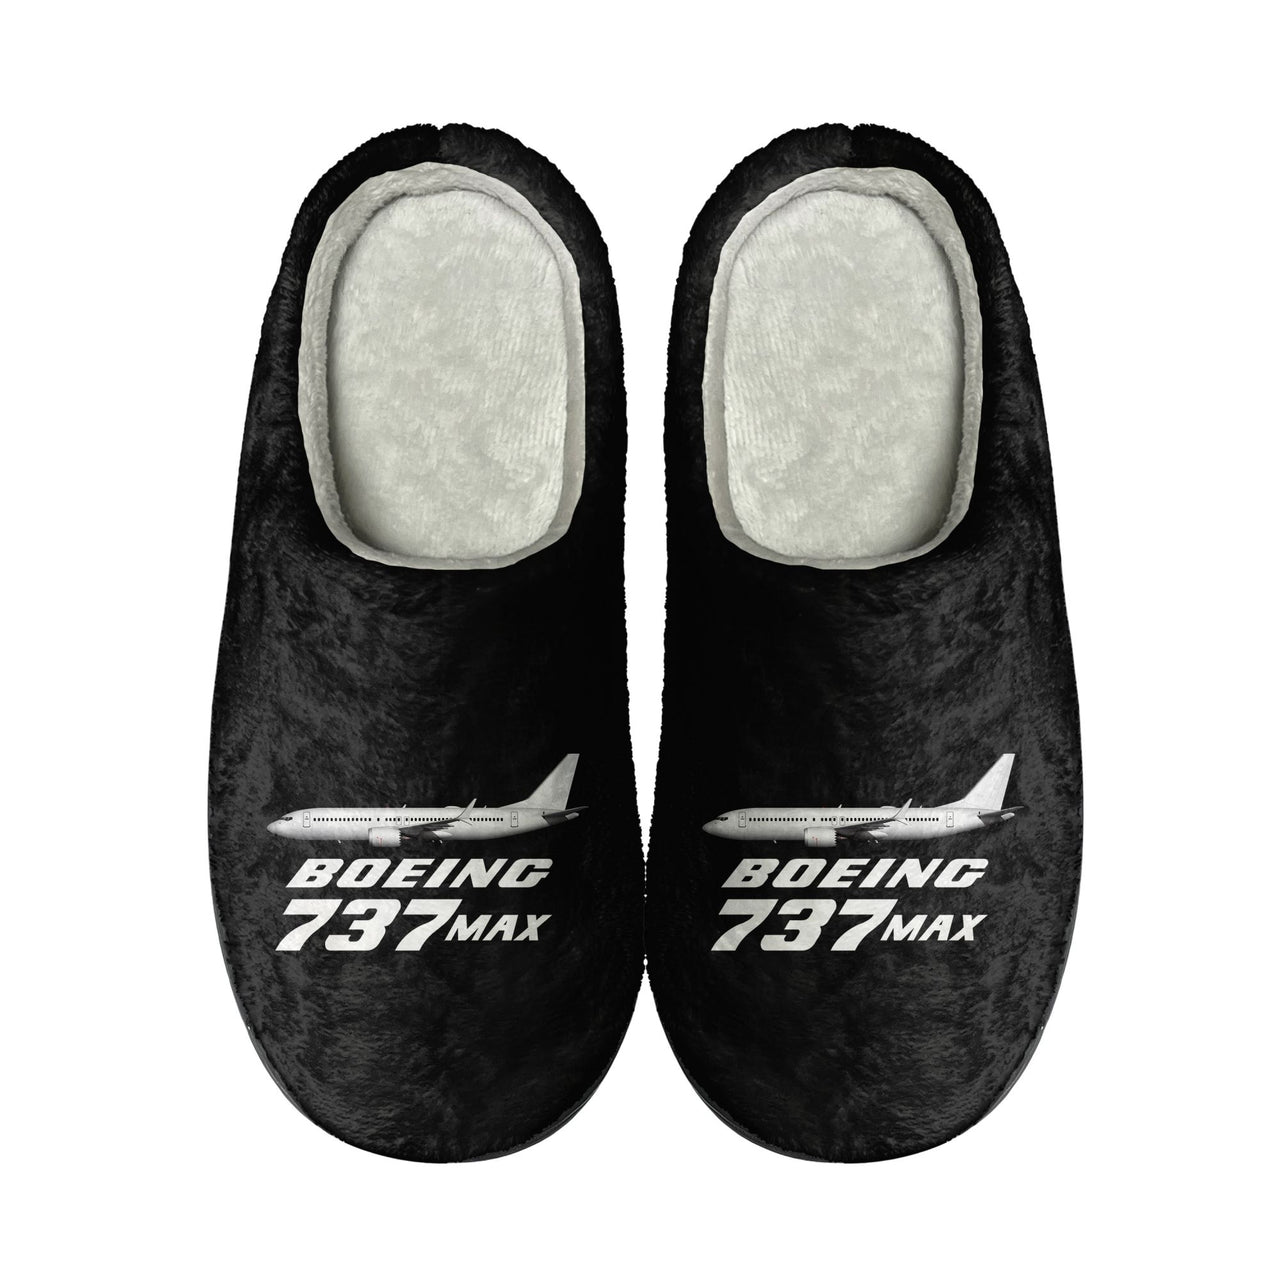 The Boeing 737Max Designed Cotton Slippers